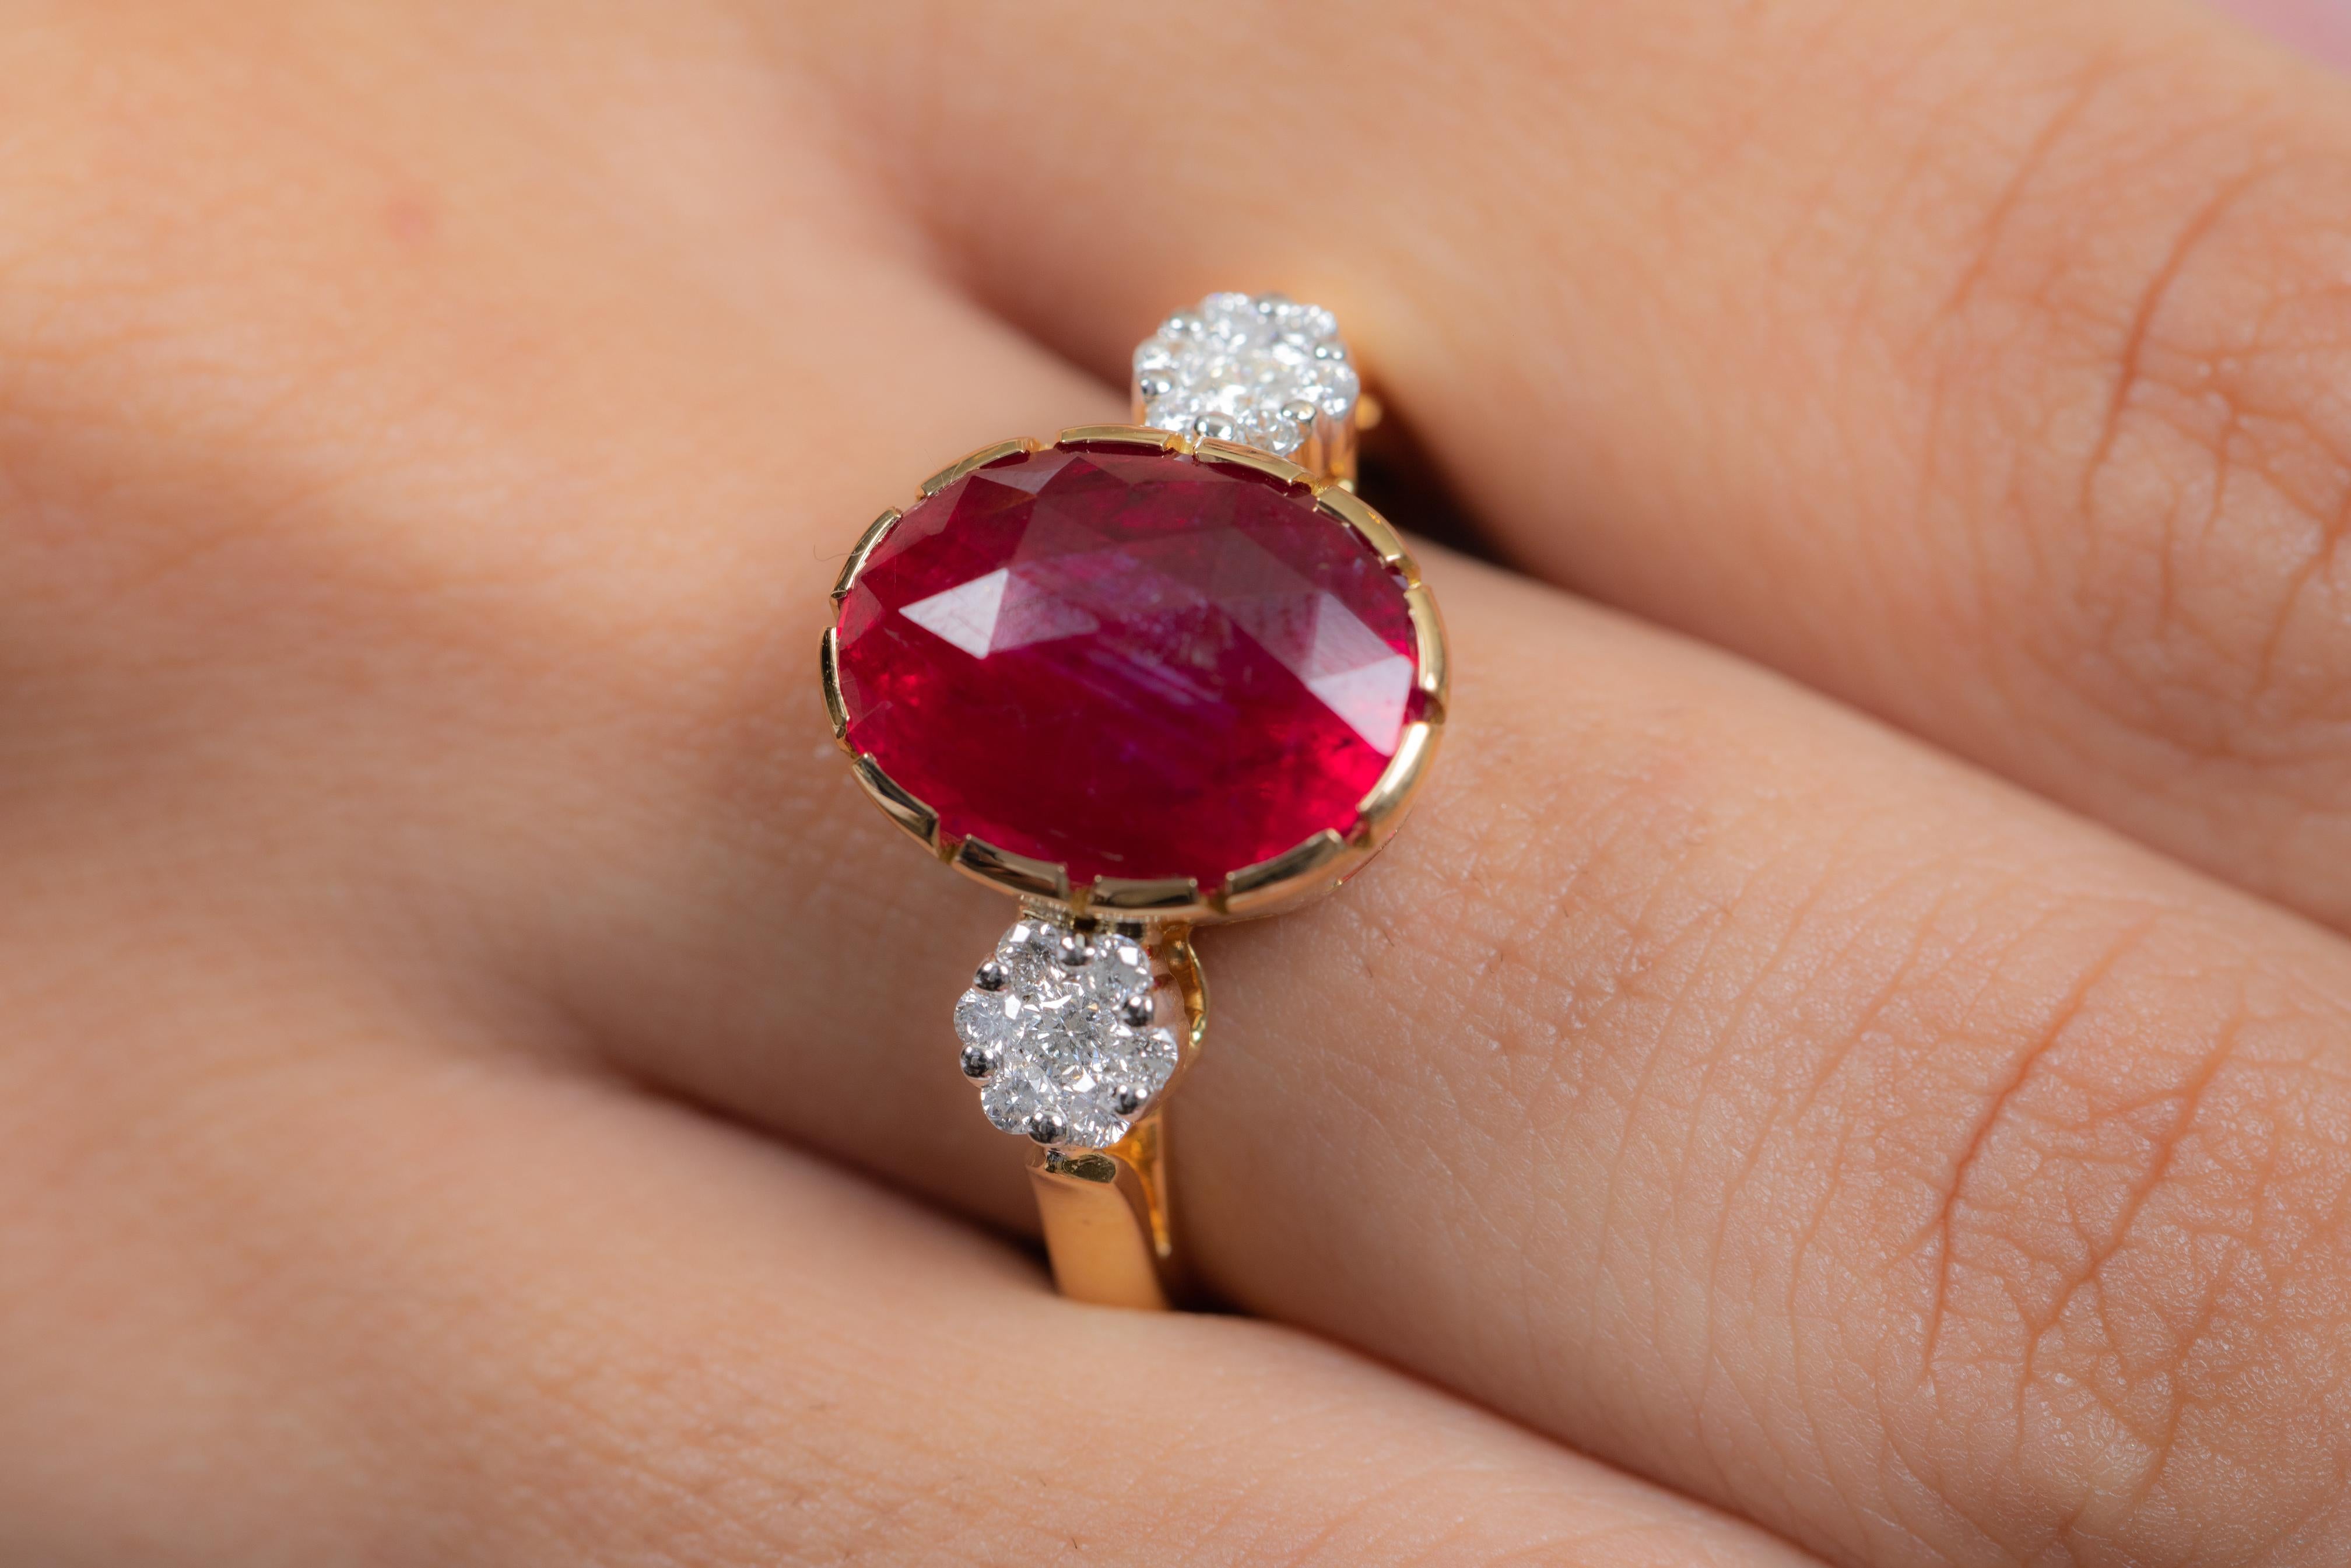 For Sale:  2.65 Carat Oval Cut Ruby Diamond Engagement Ring in 18 Karat Yellow Gold 2